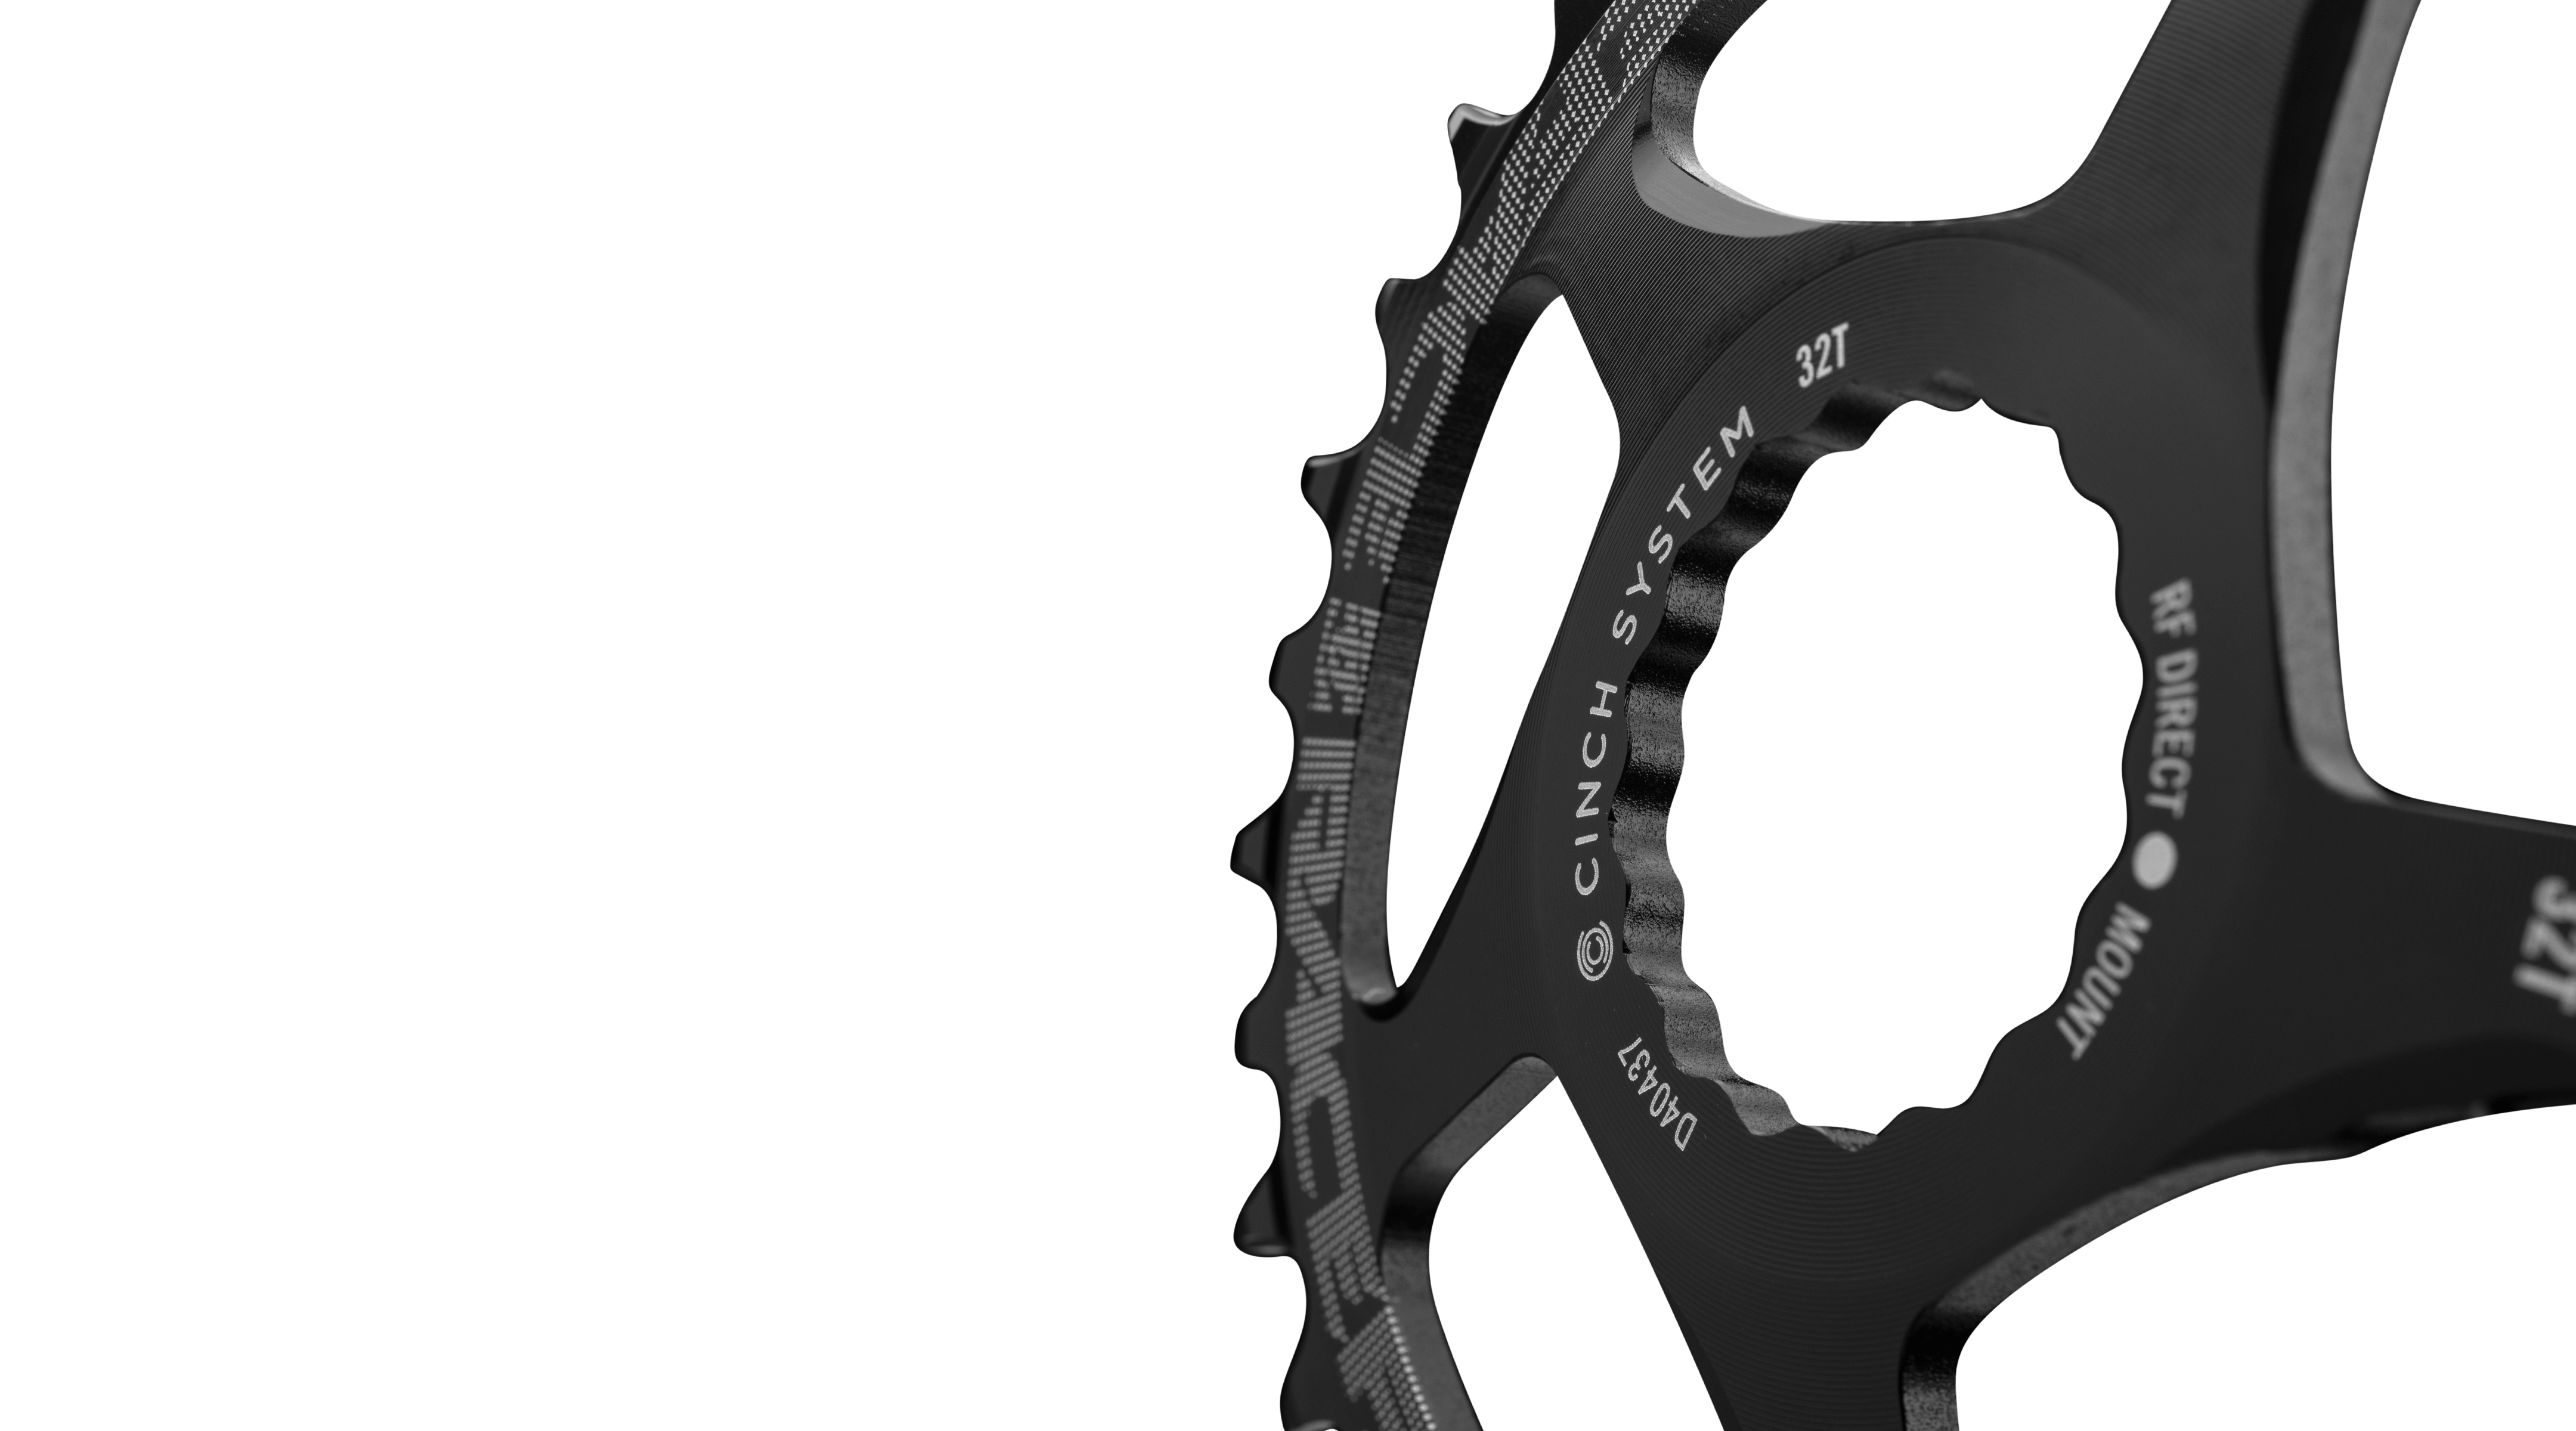 1X Cinch, Direct Mount Chainring - NW | Raceface – Race Face CA